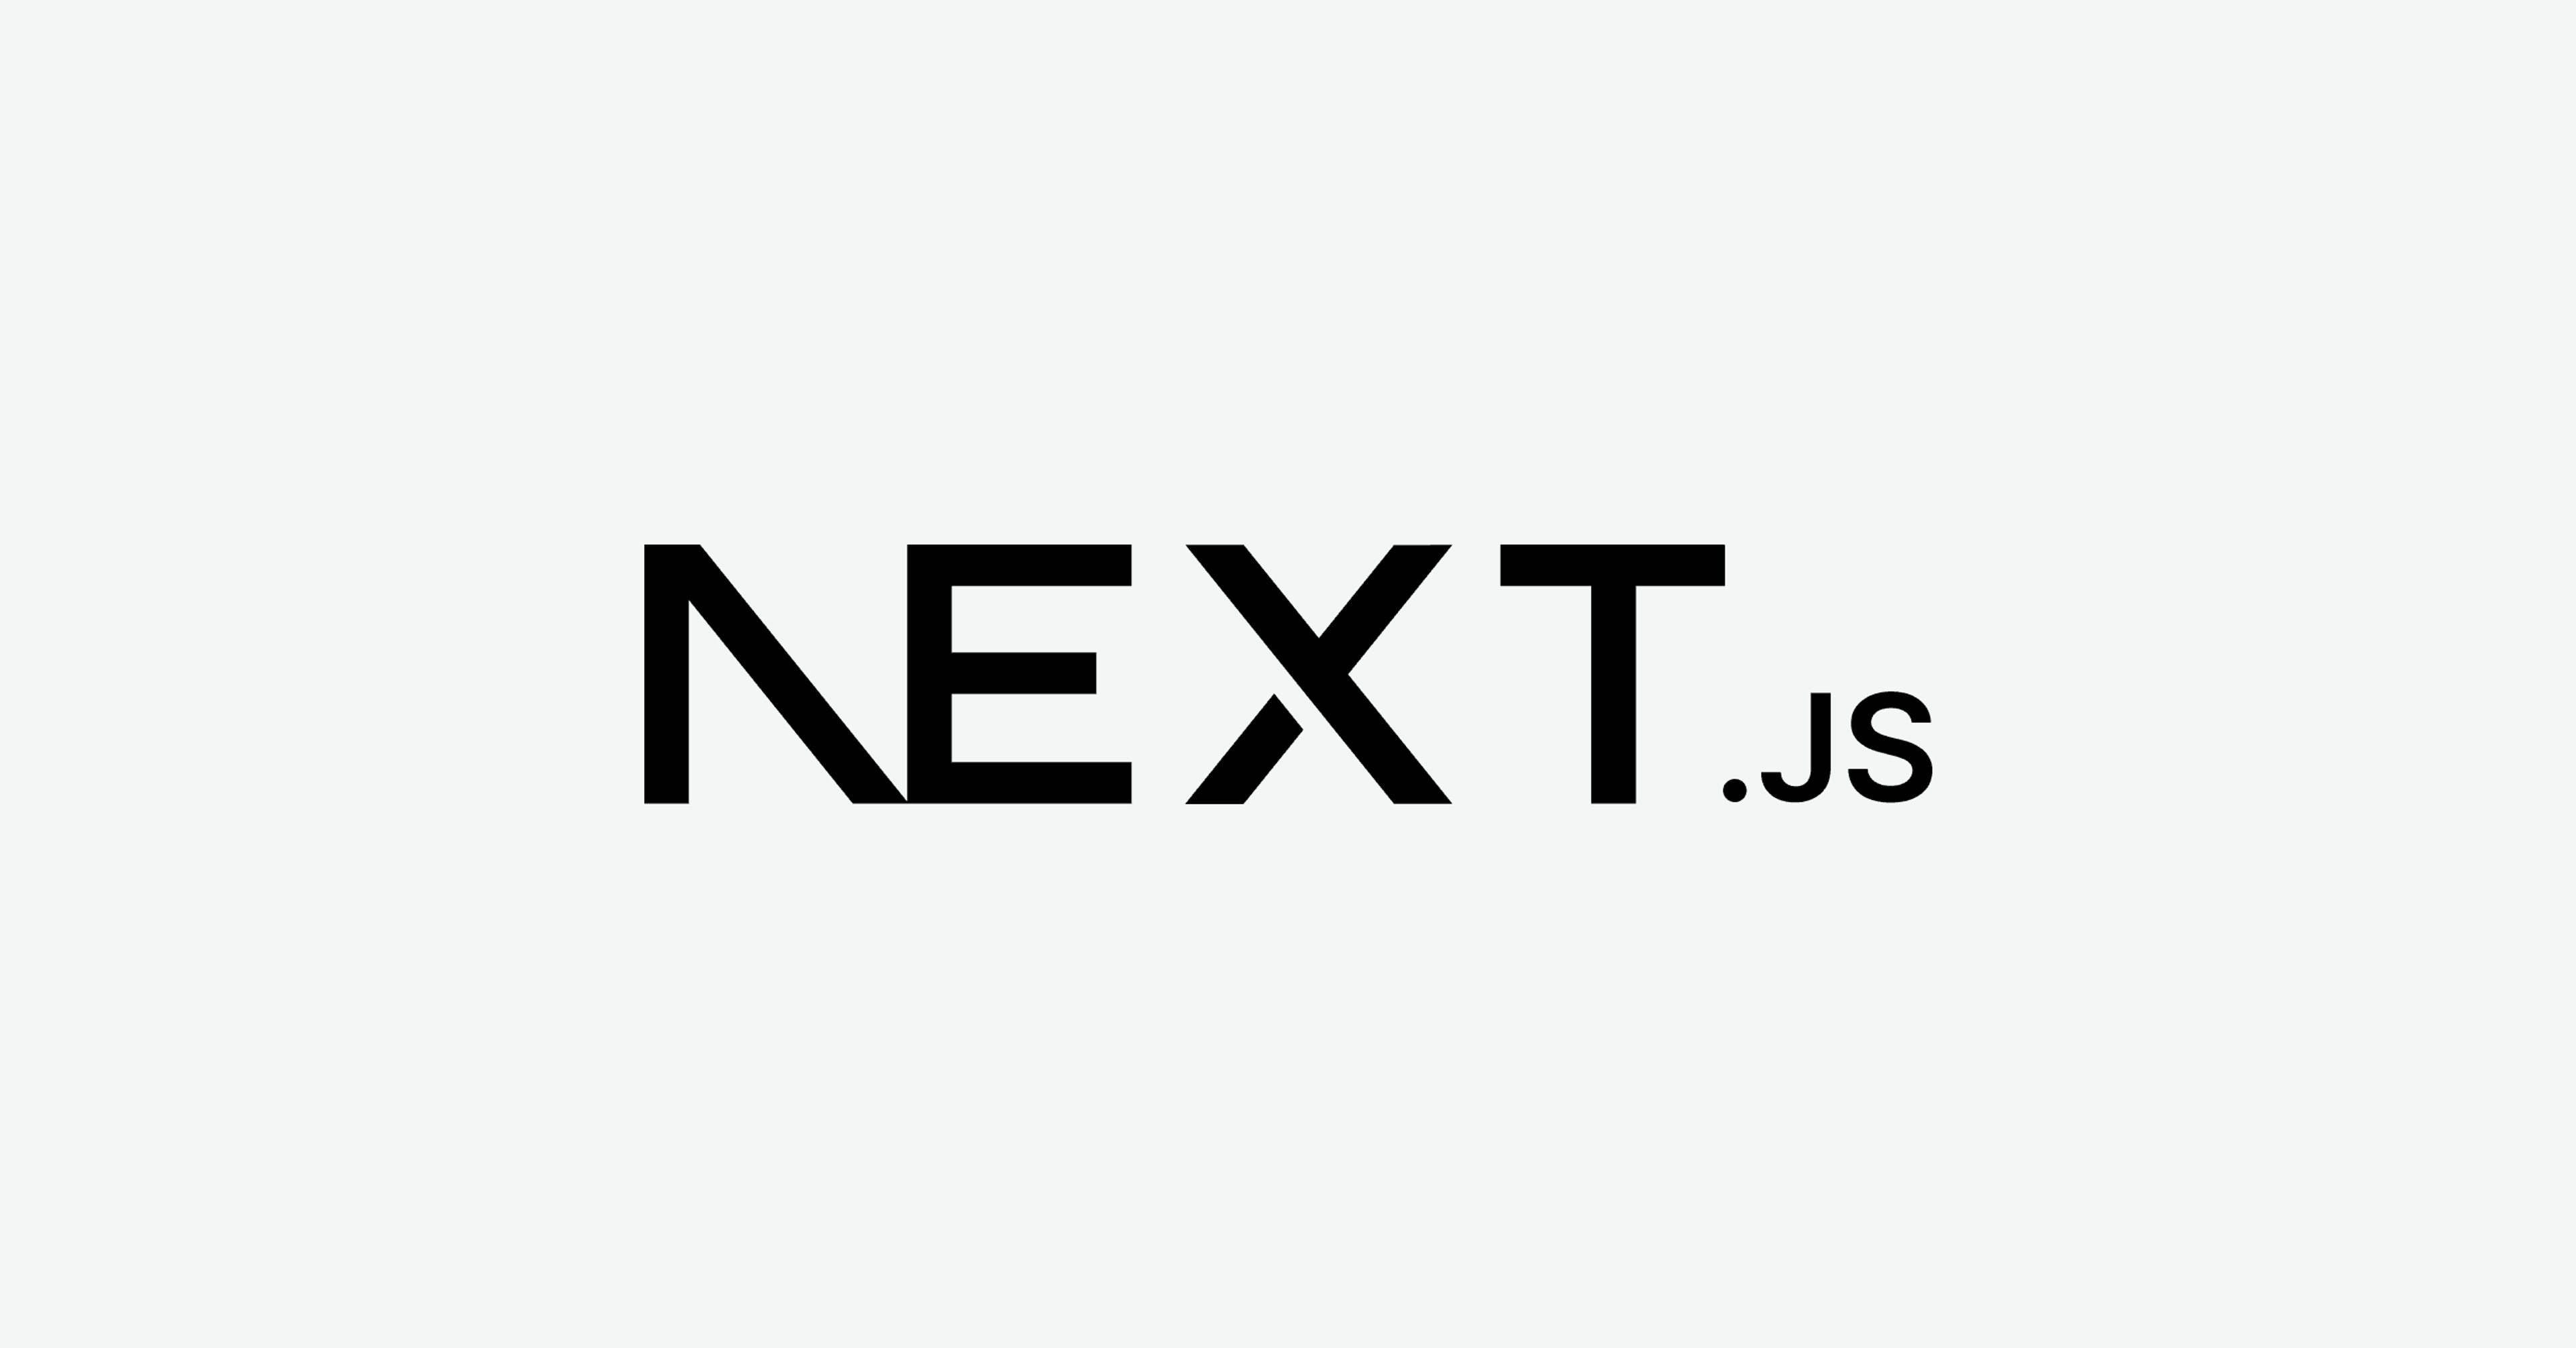 Next.js is very powerful